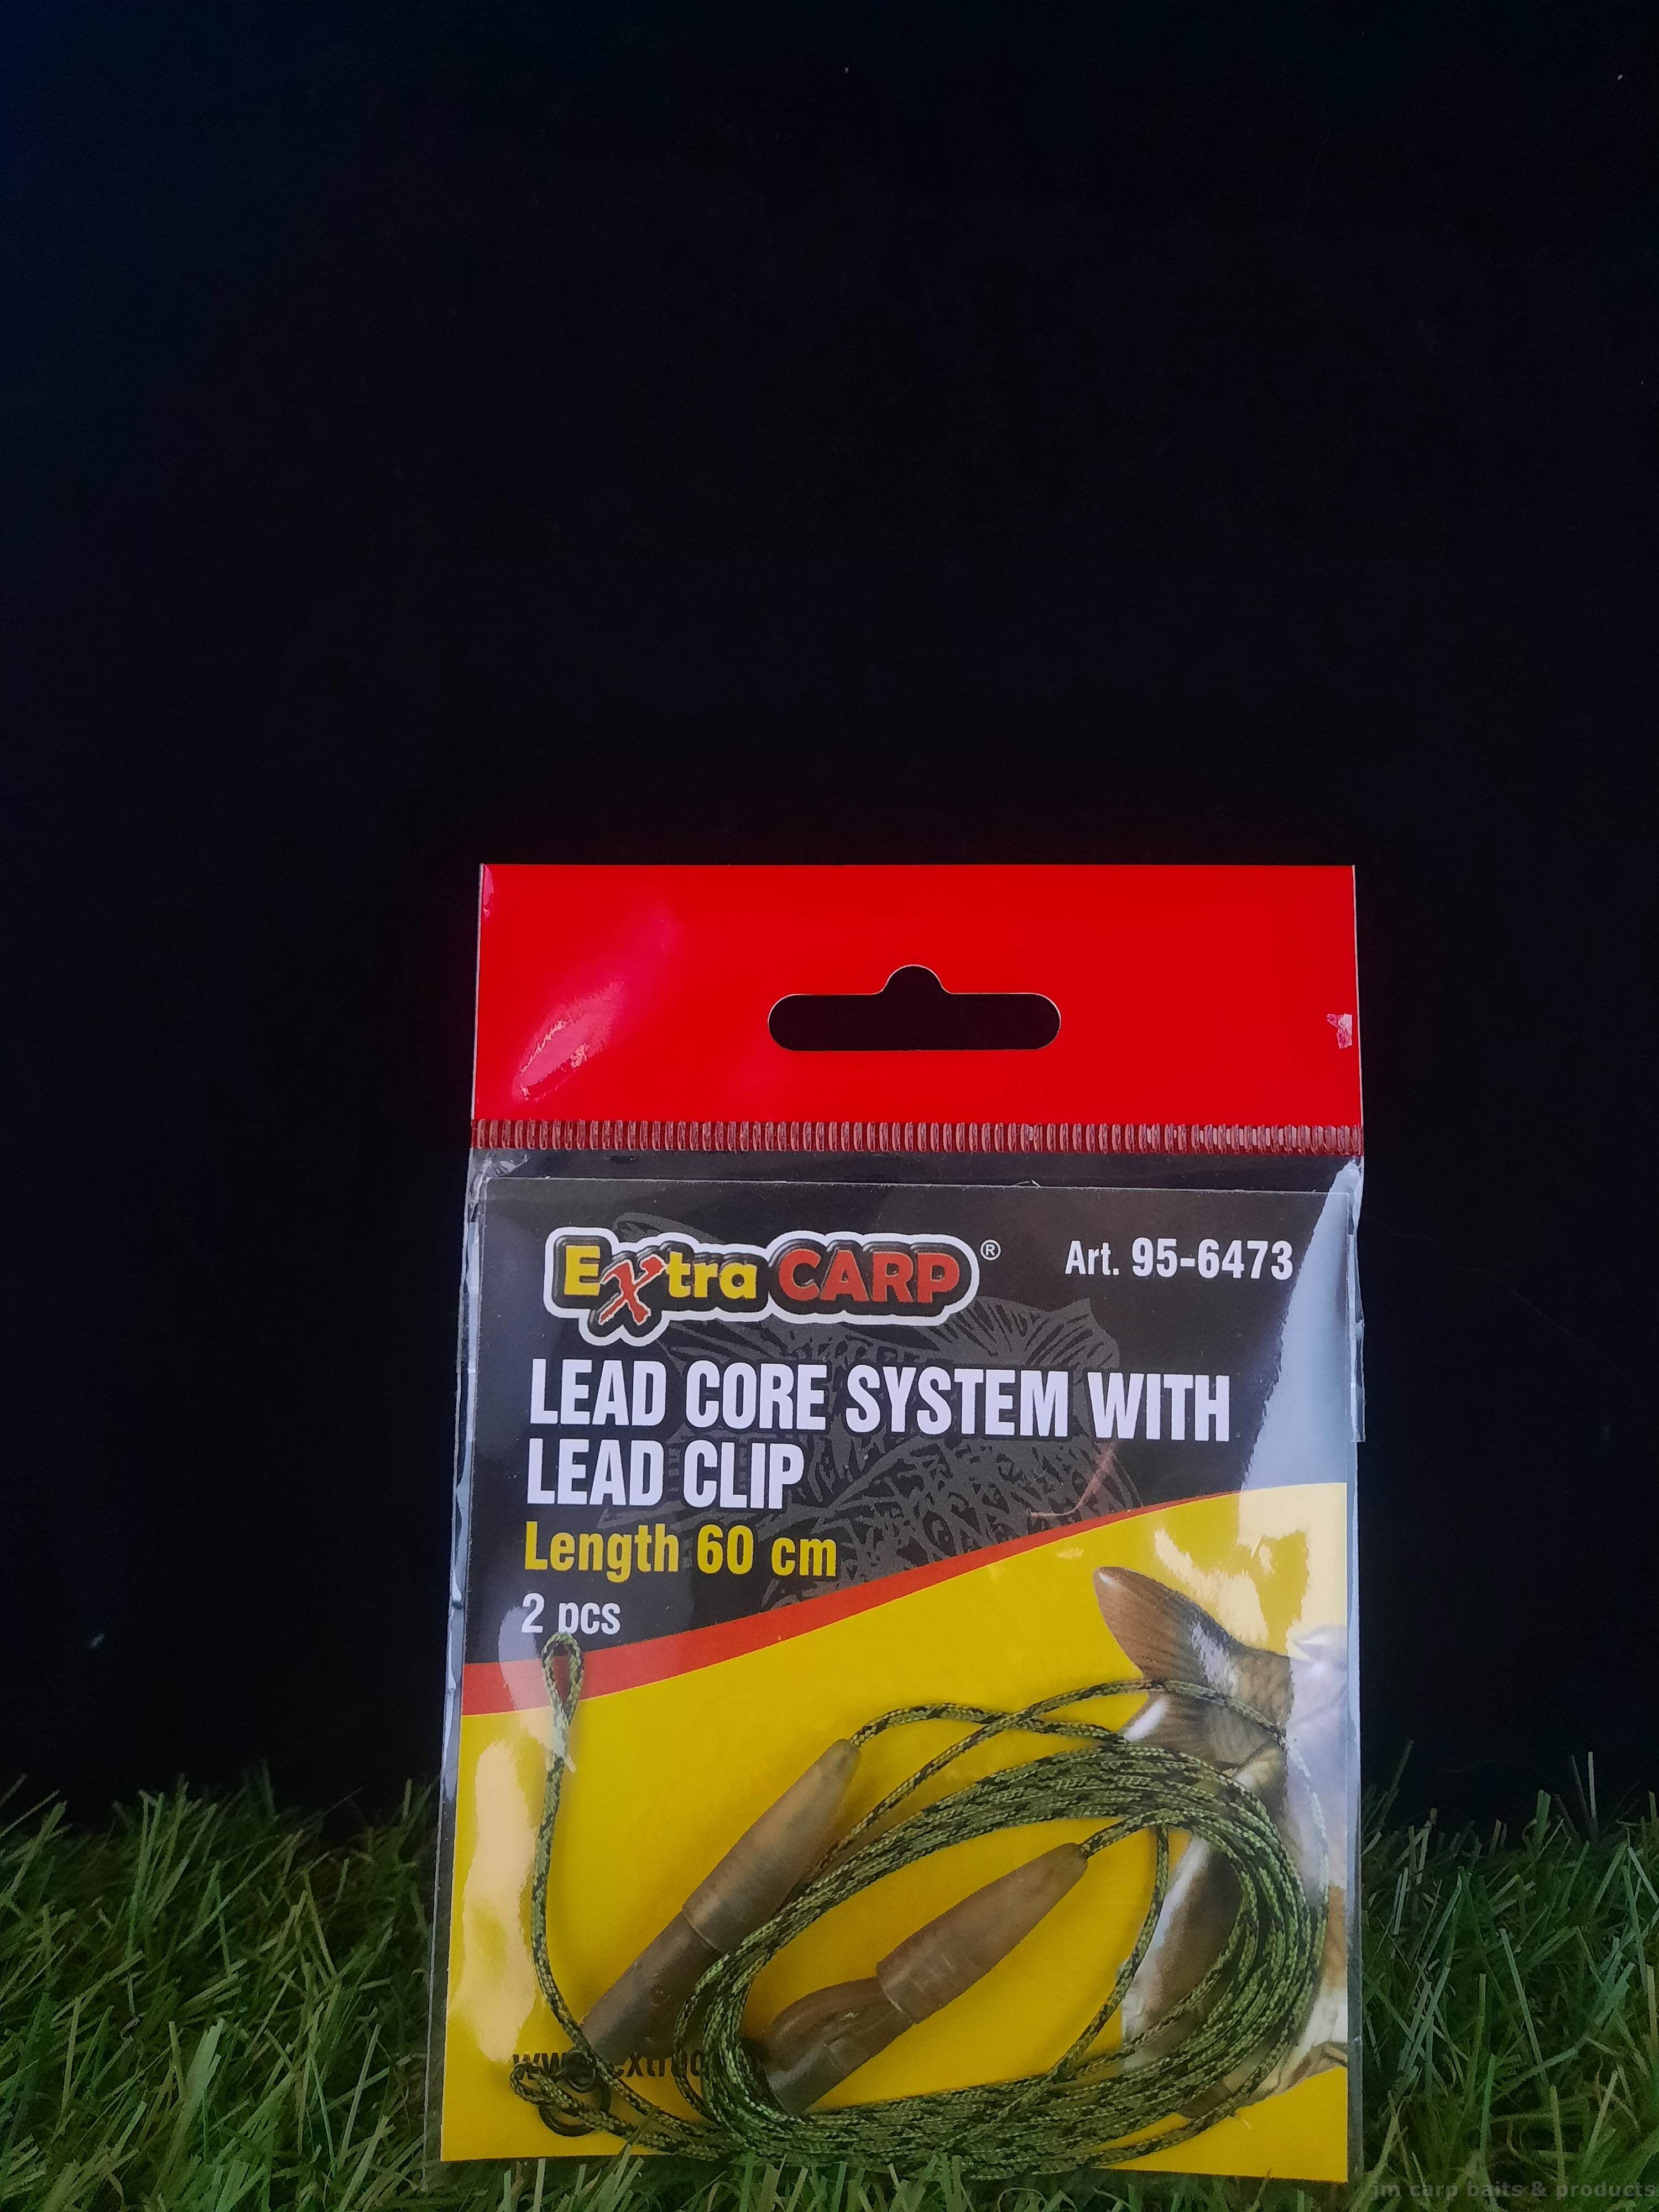 Extra Carp lead core system whit lead clip